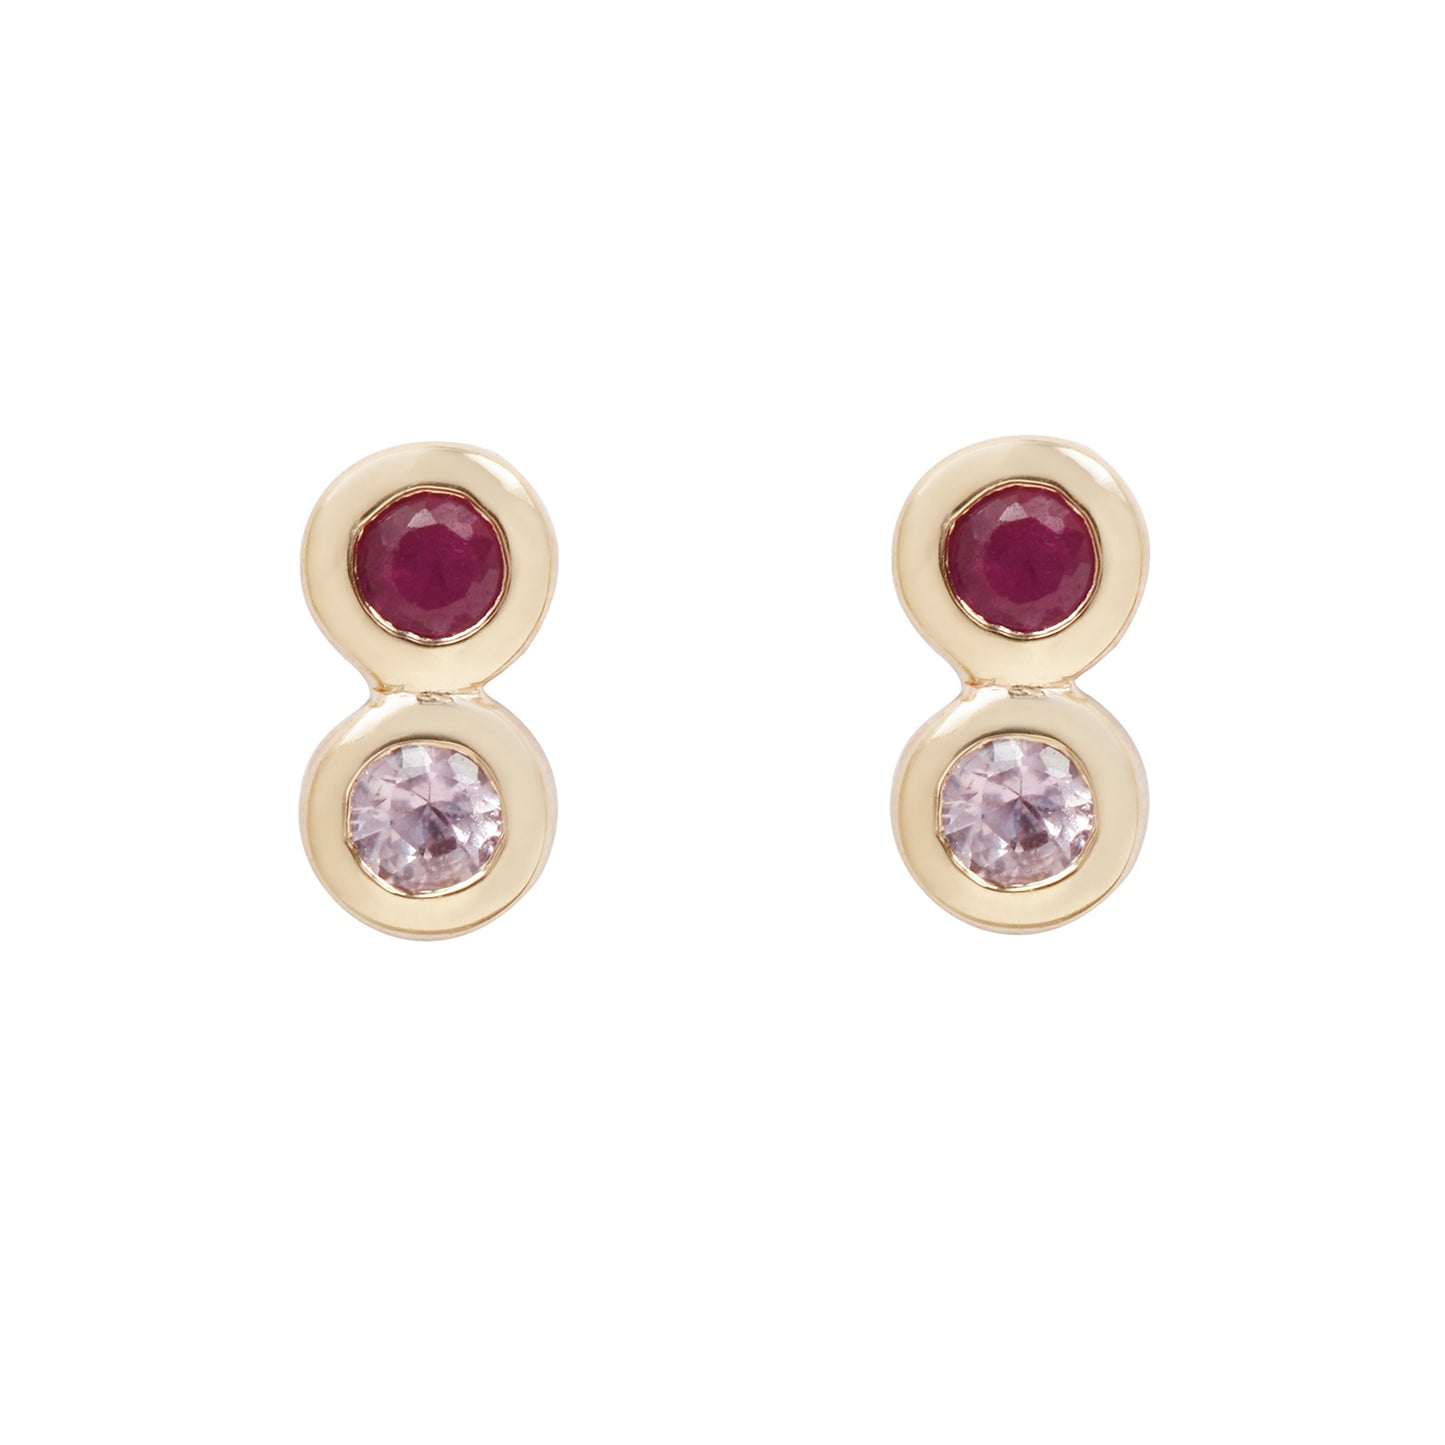 Scosha Rosé Infinity Studs - Sapphire and Ruby Studs Set in Yellow Gold